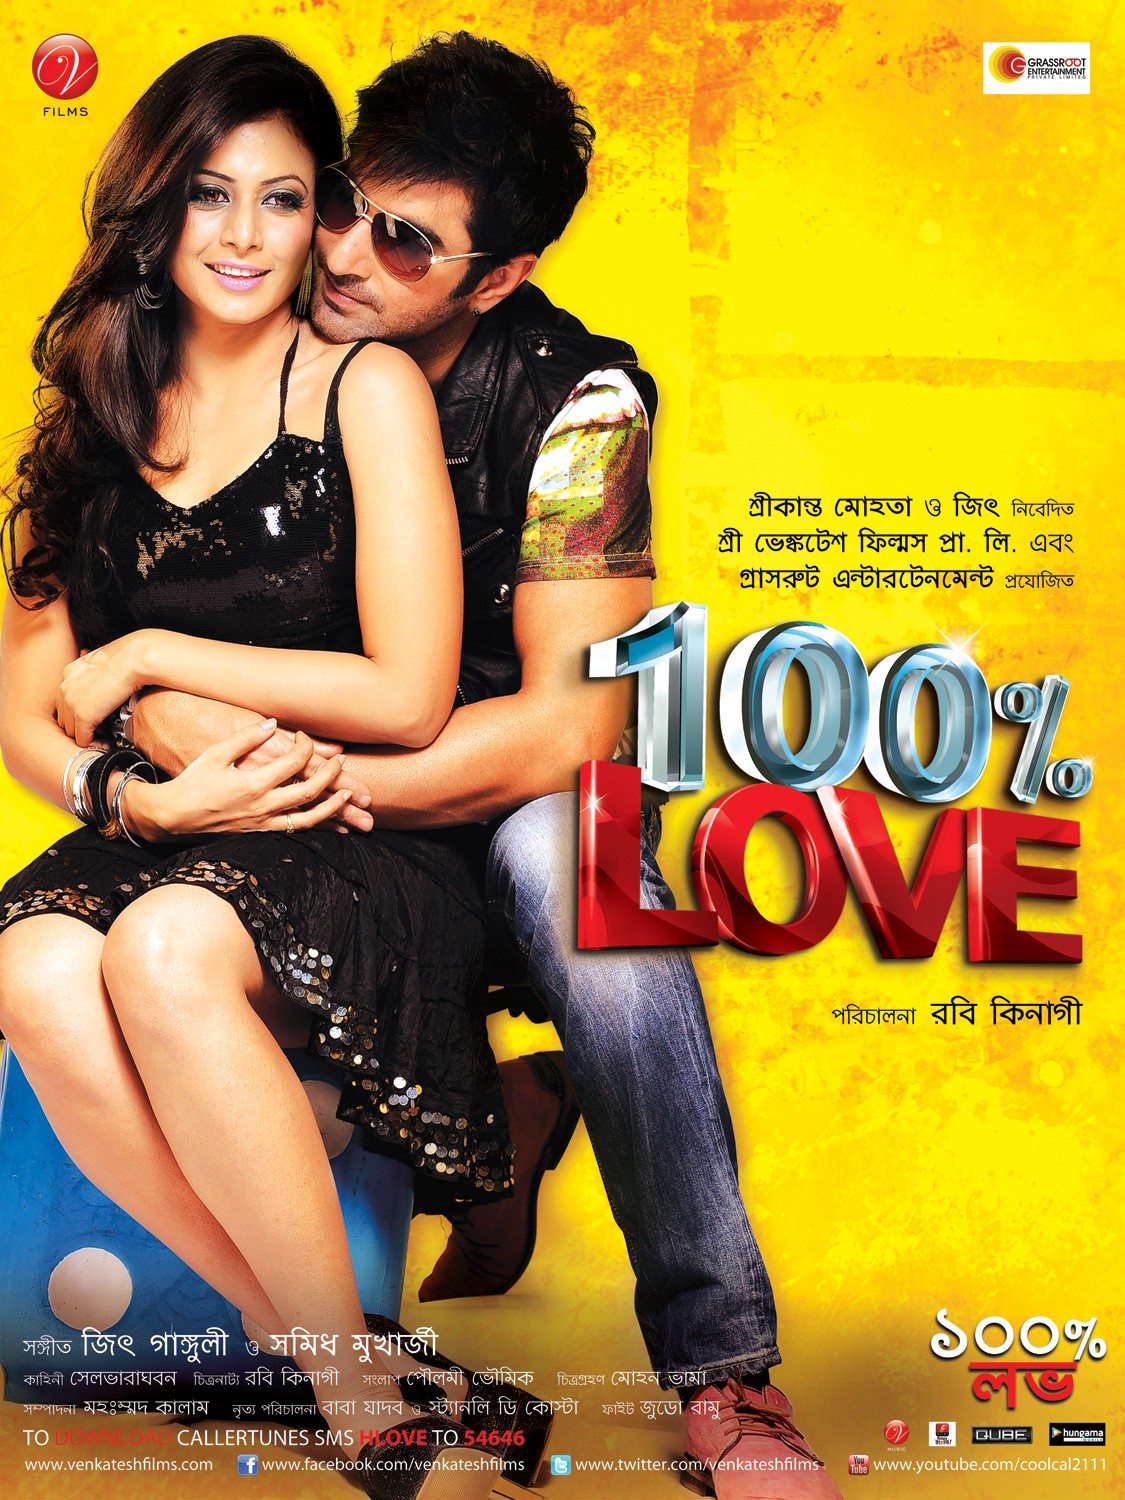 Extra Large Movie Poster Image for 100% Love (#8 of 13)